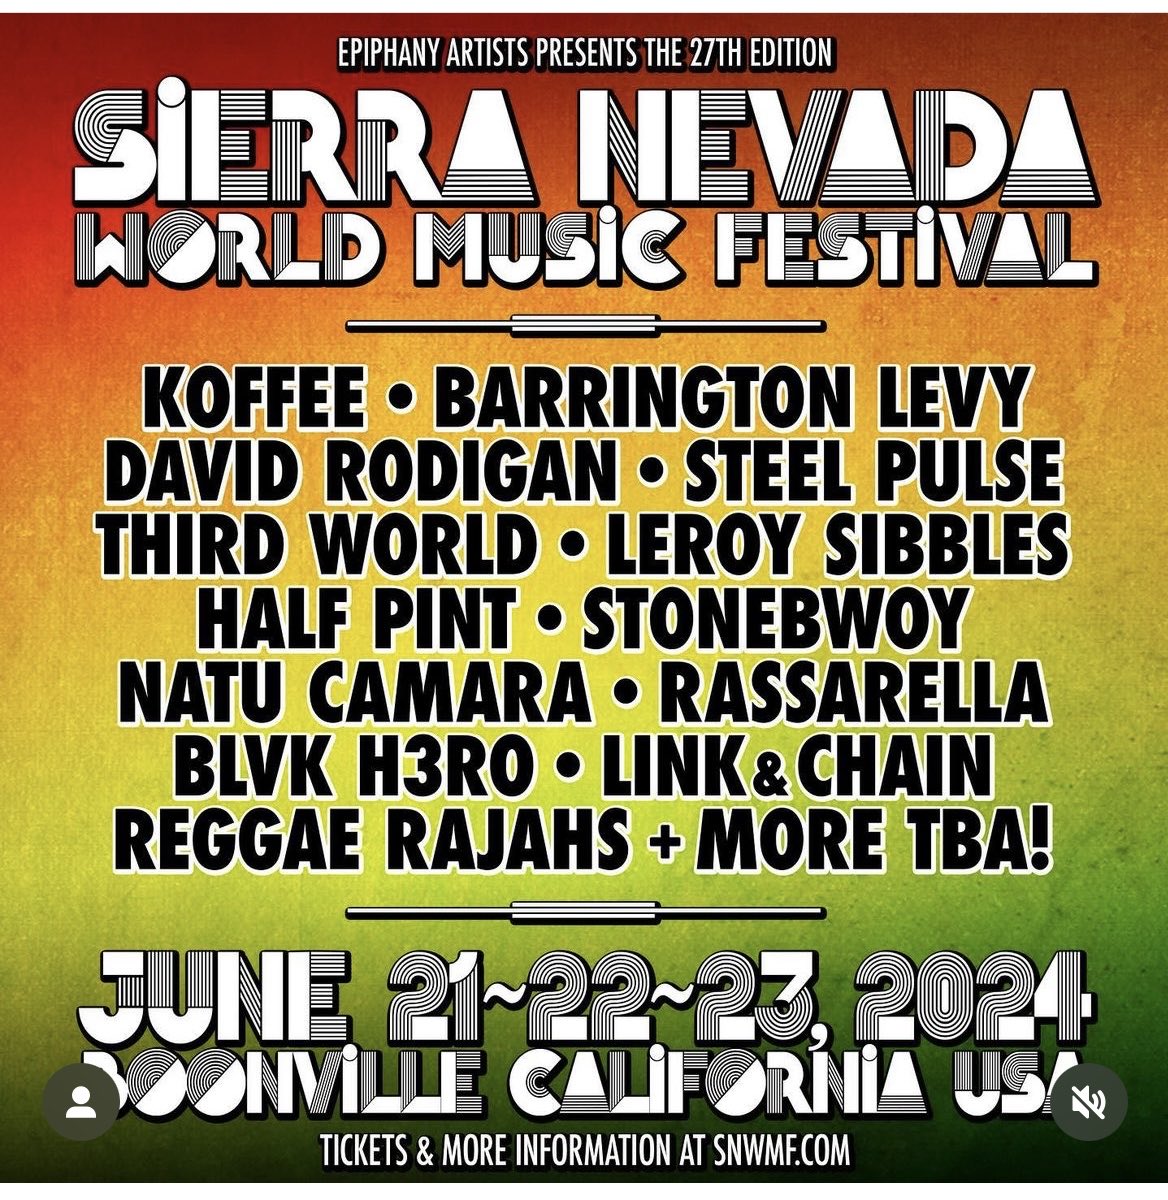 California sunshine and a fantastic line up of Reggae stars; so looking forward to playing back at this amazing festival in June.